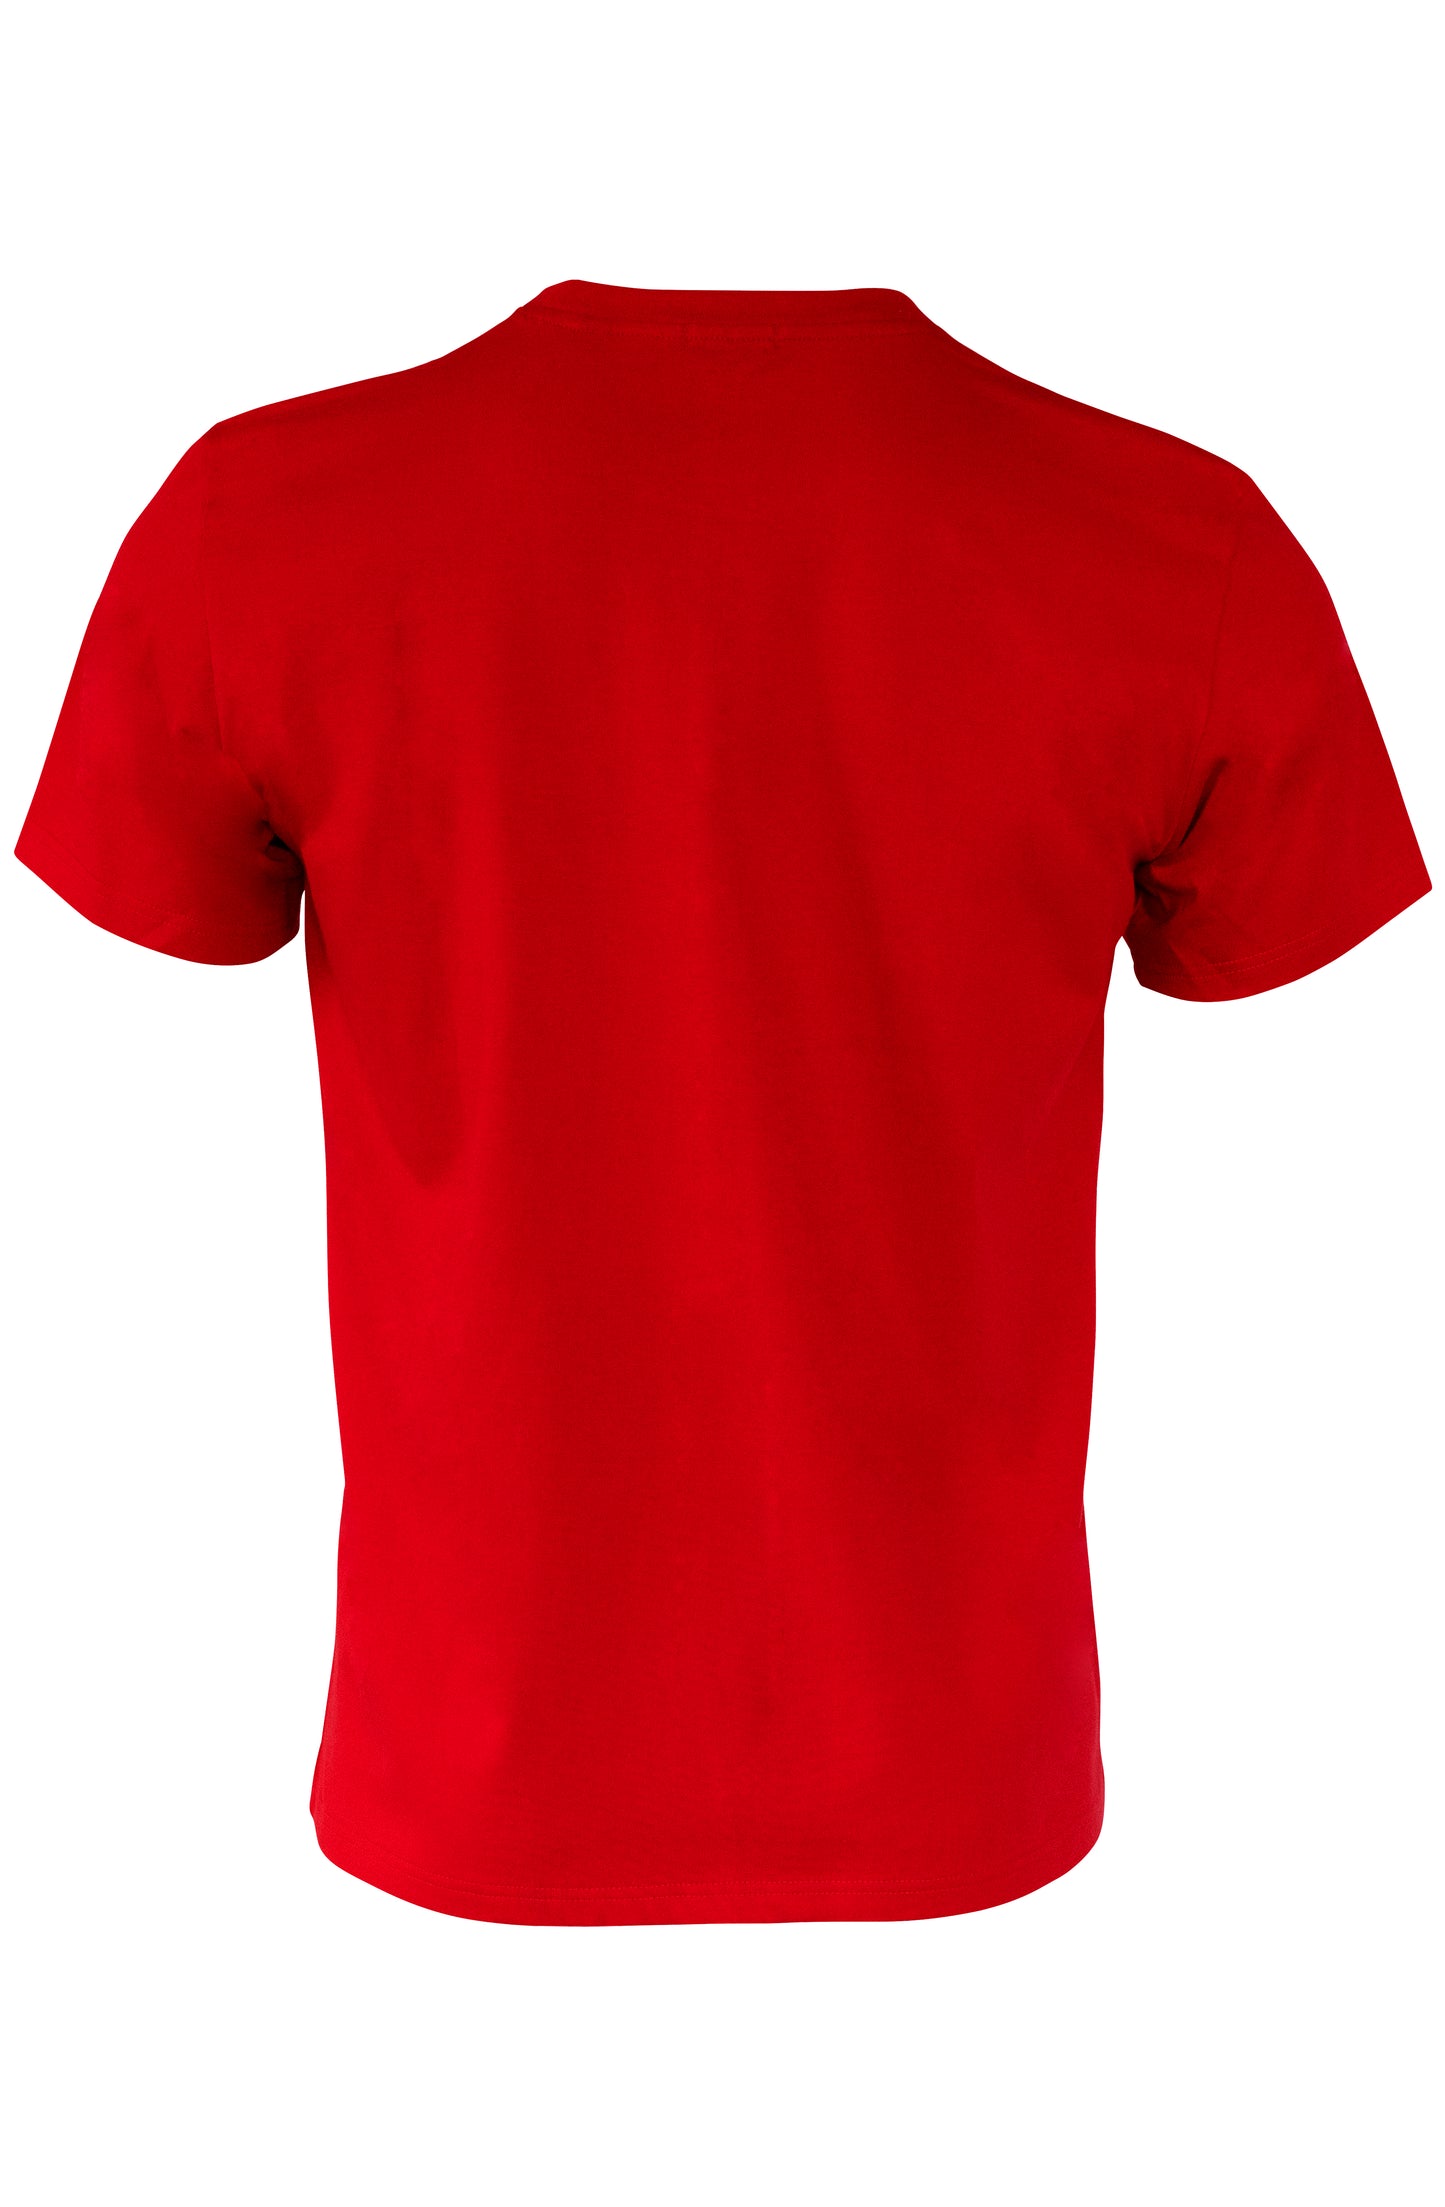 ICONIC T-SHIRT | RED